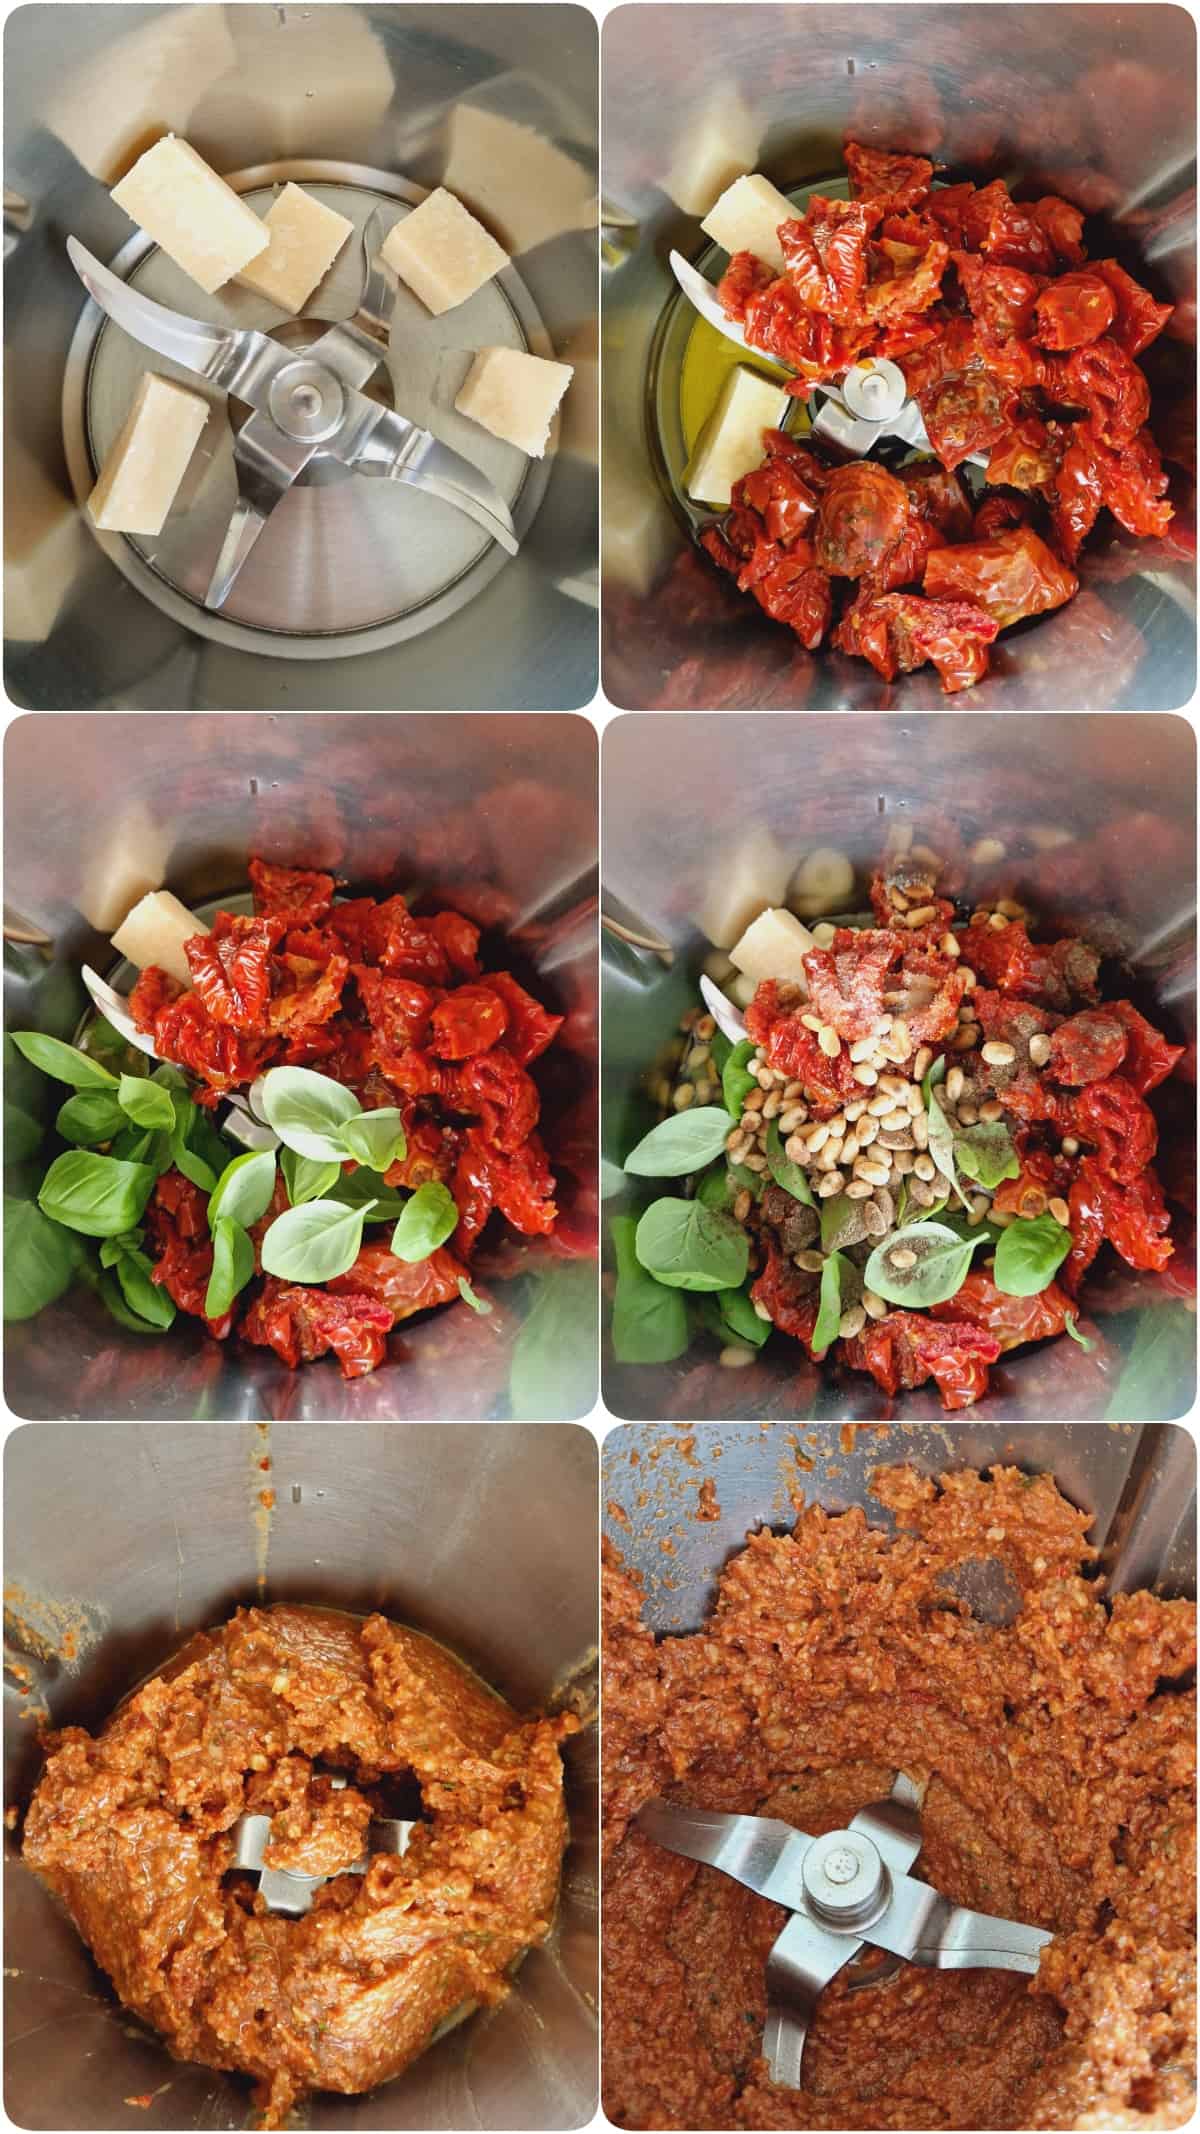 A collage of the preparation steps for pesto rosso.